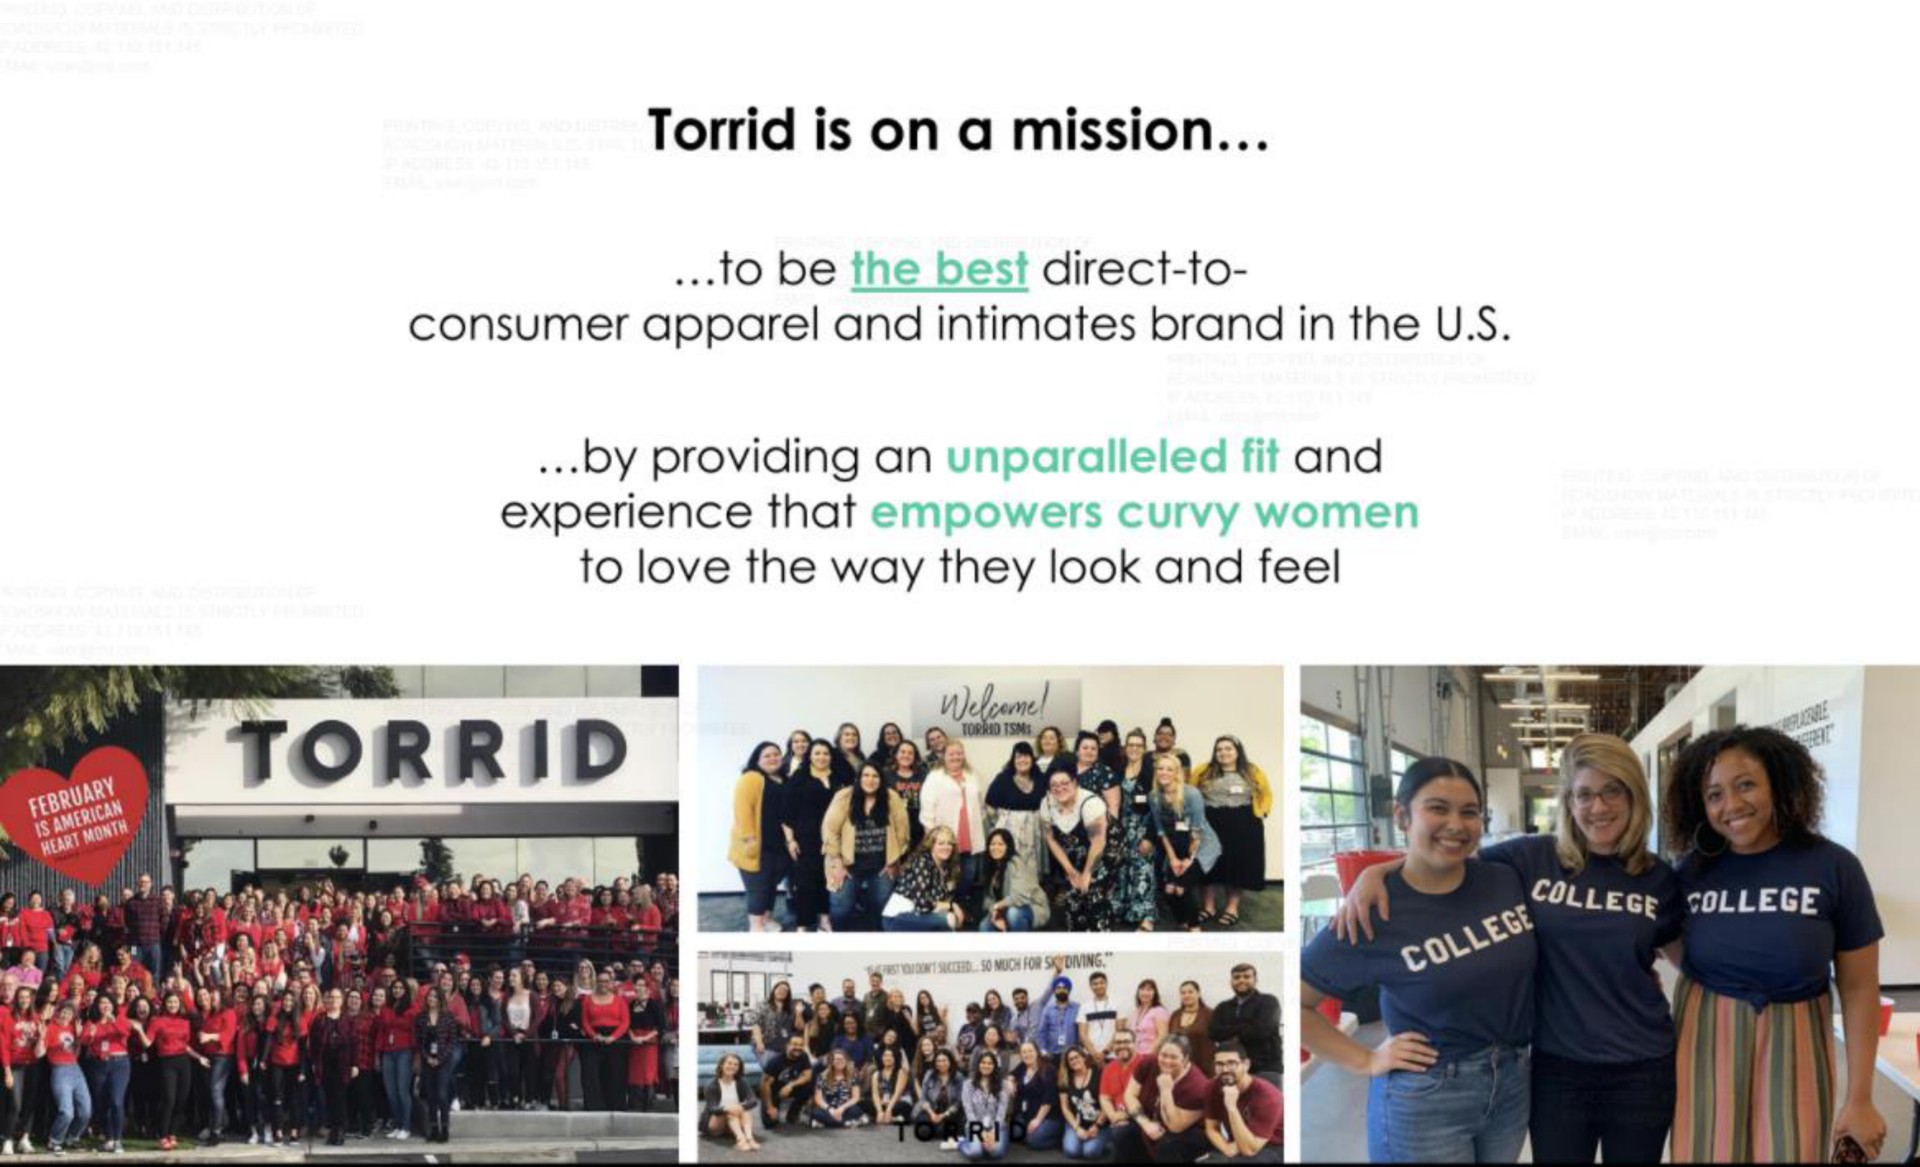 torrid is on a mission to be direct to consumer apparel and intimates brand in the by providing an experience that and to love the way they look and feel a so | Torrid